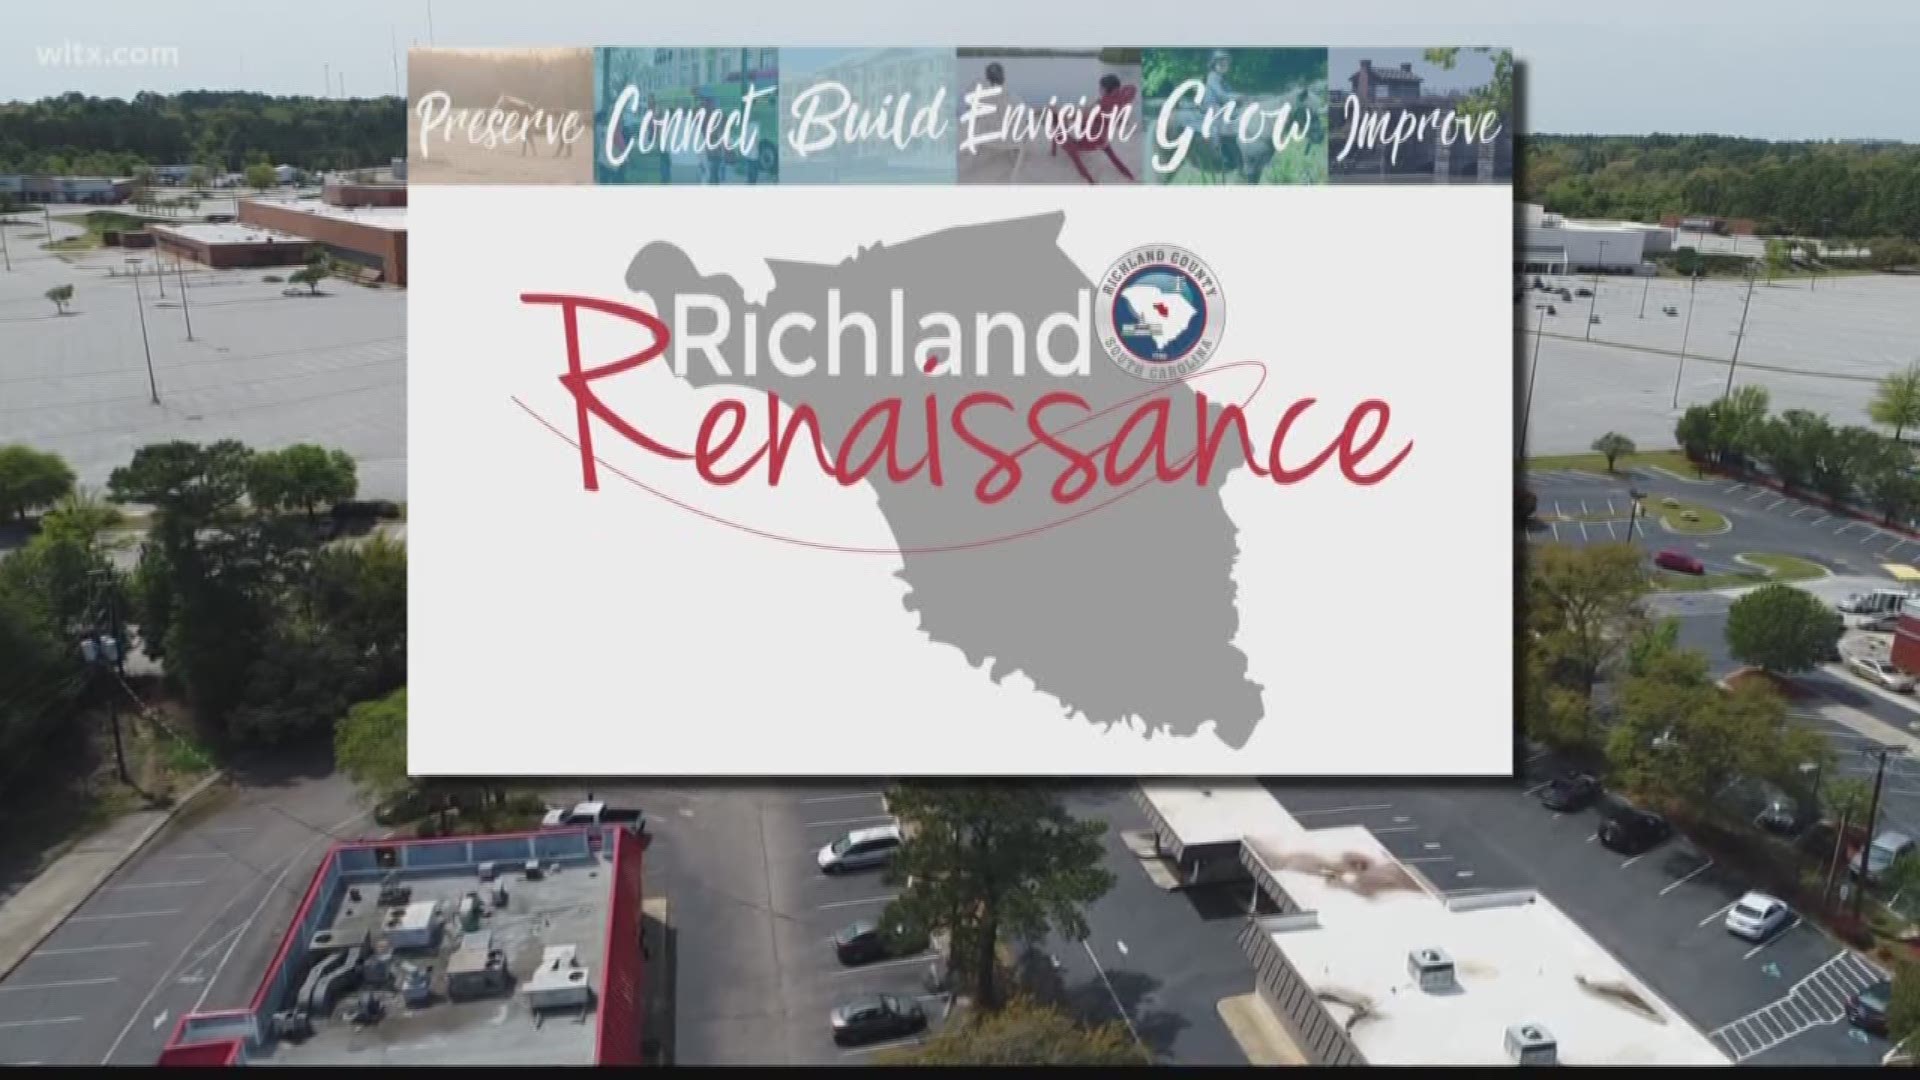 Richland county has the second largest population of any county in our state, the county has a budget of nearly $900 Million  yet in the last month they have fired their administrator twice...and he's still getting paid. 